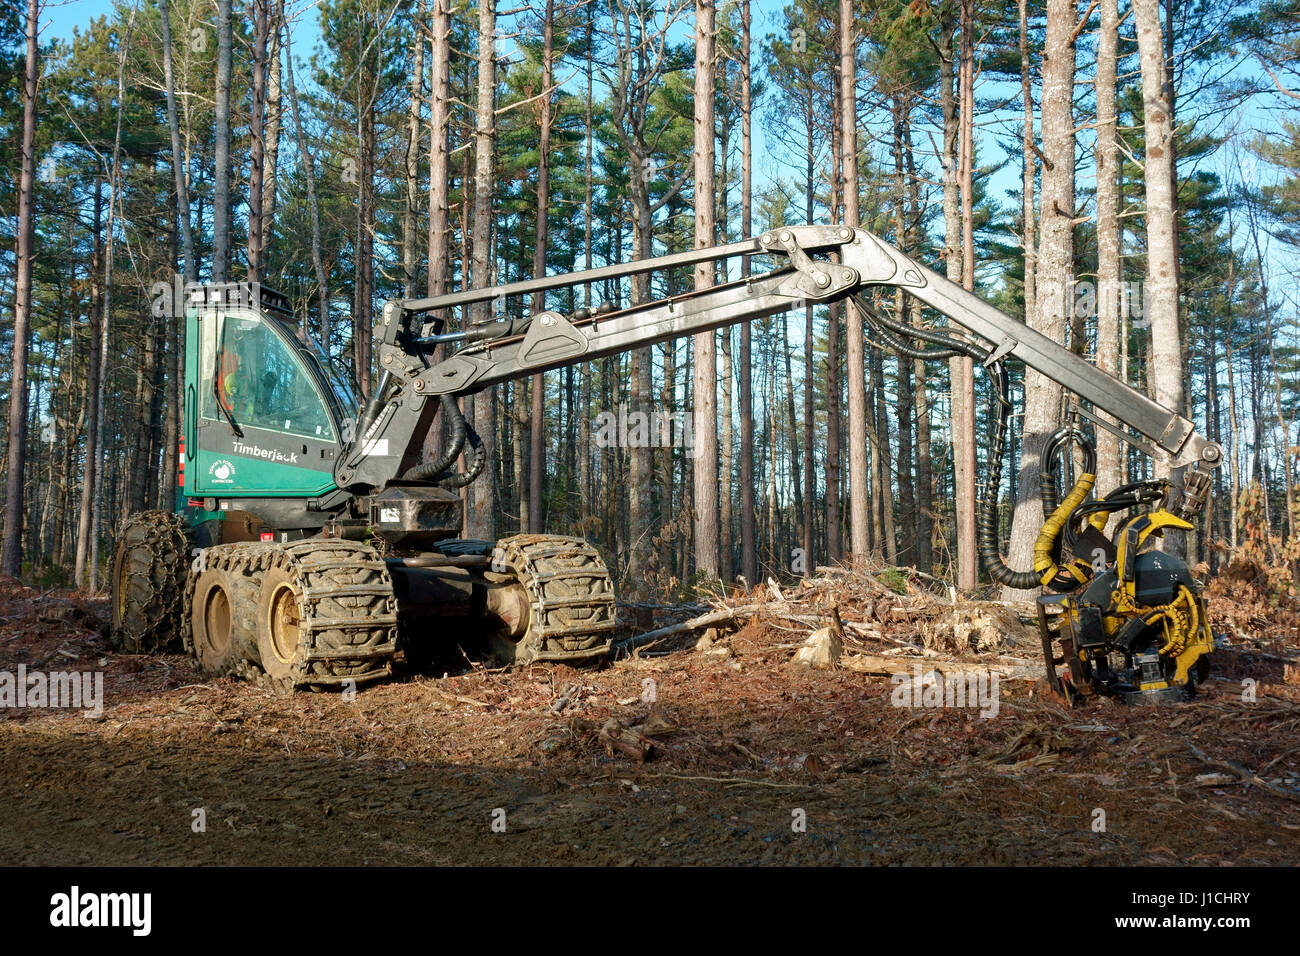 a-machine-for-harvesting-trees-in-a-forest-J1CHRY.jpg